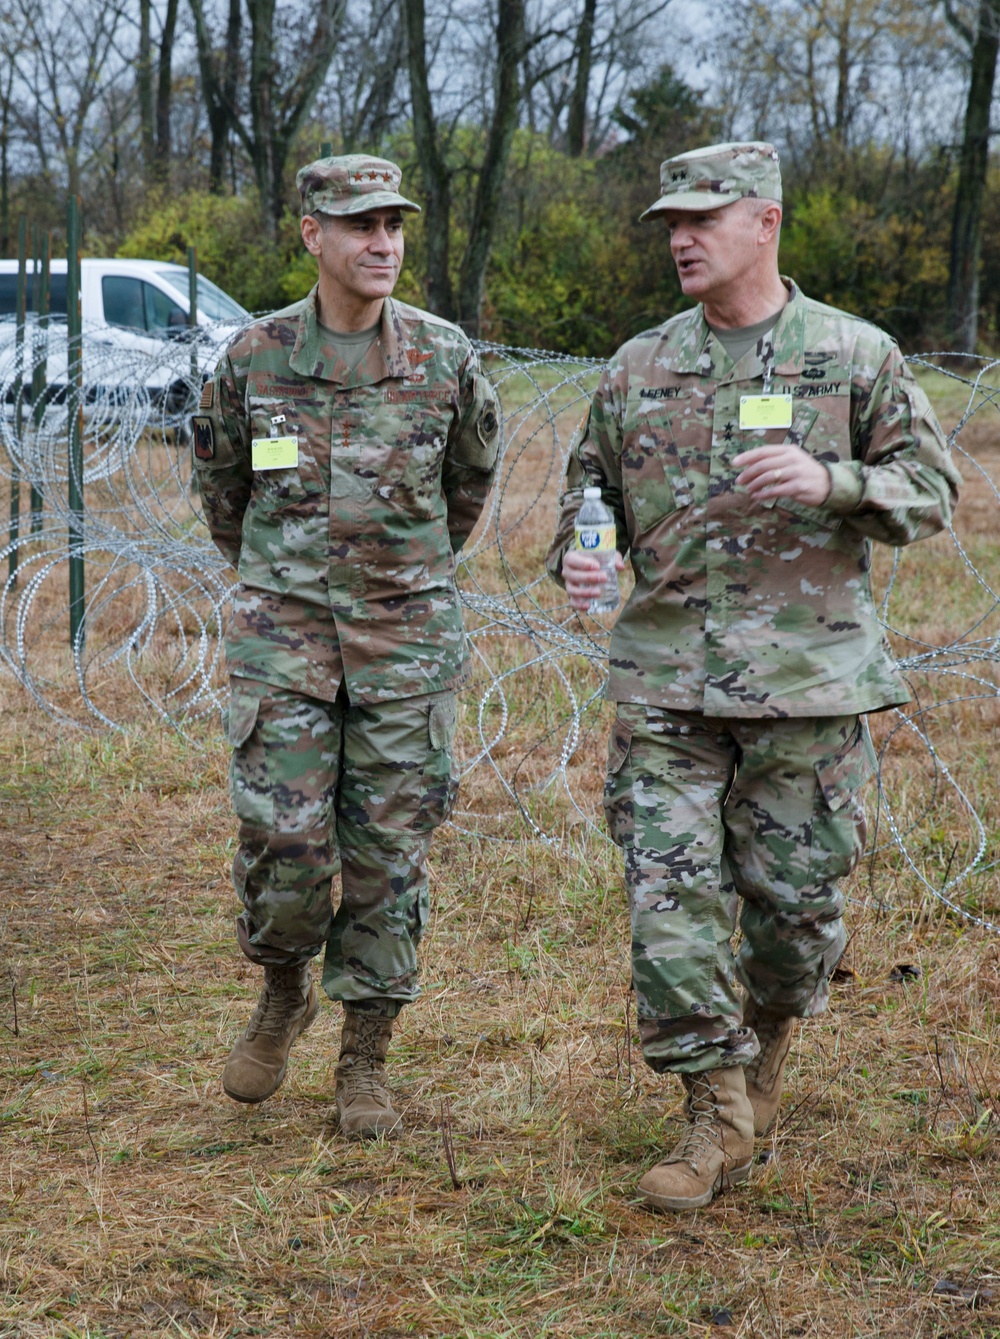 NGB Vice Chief Lt. Gen. Sasseville visits 40th ID at WFX 23-2 Indiana